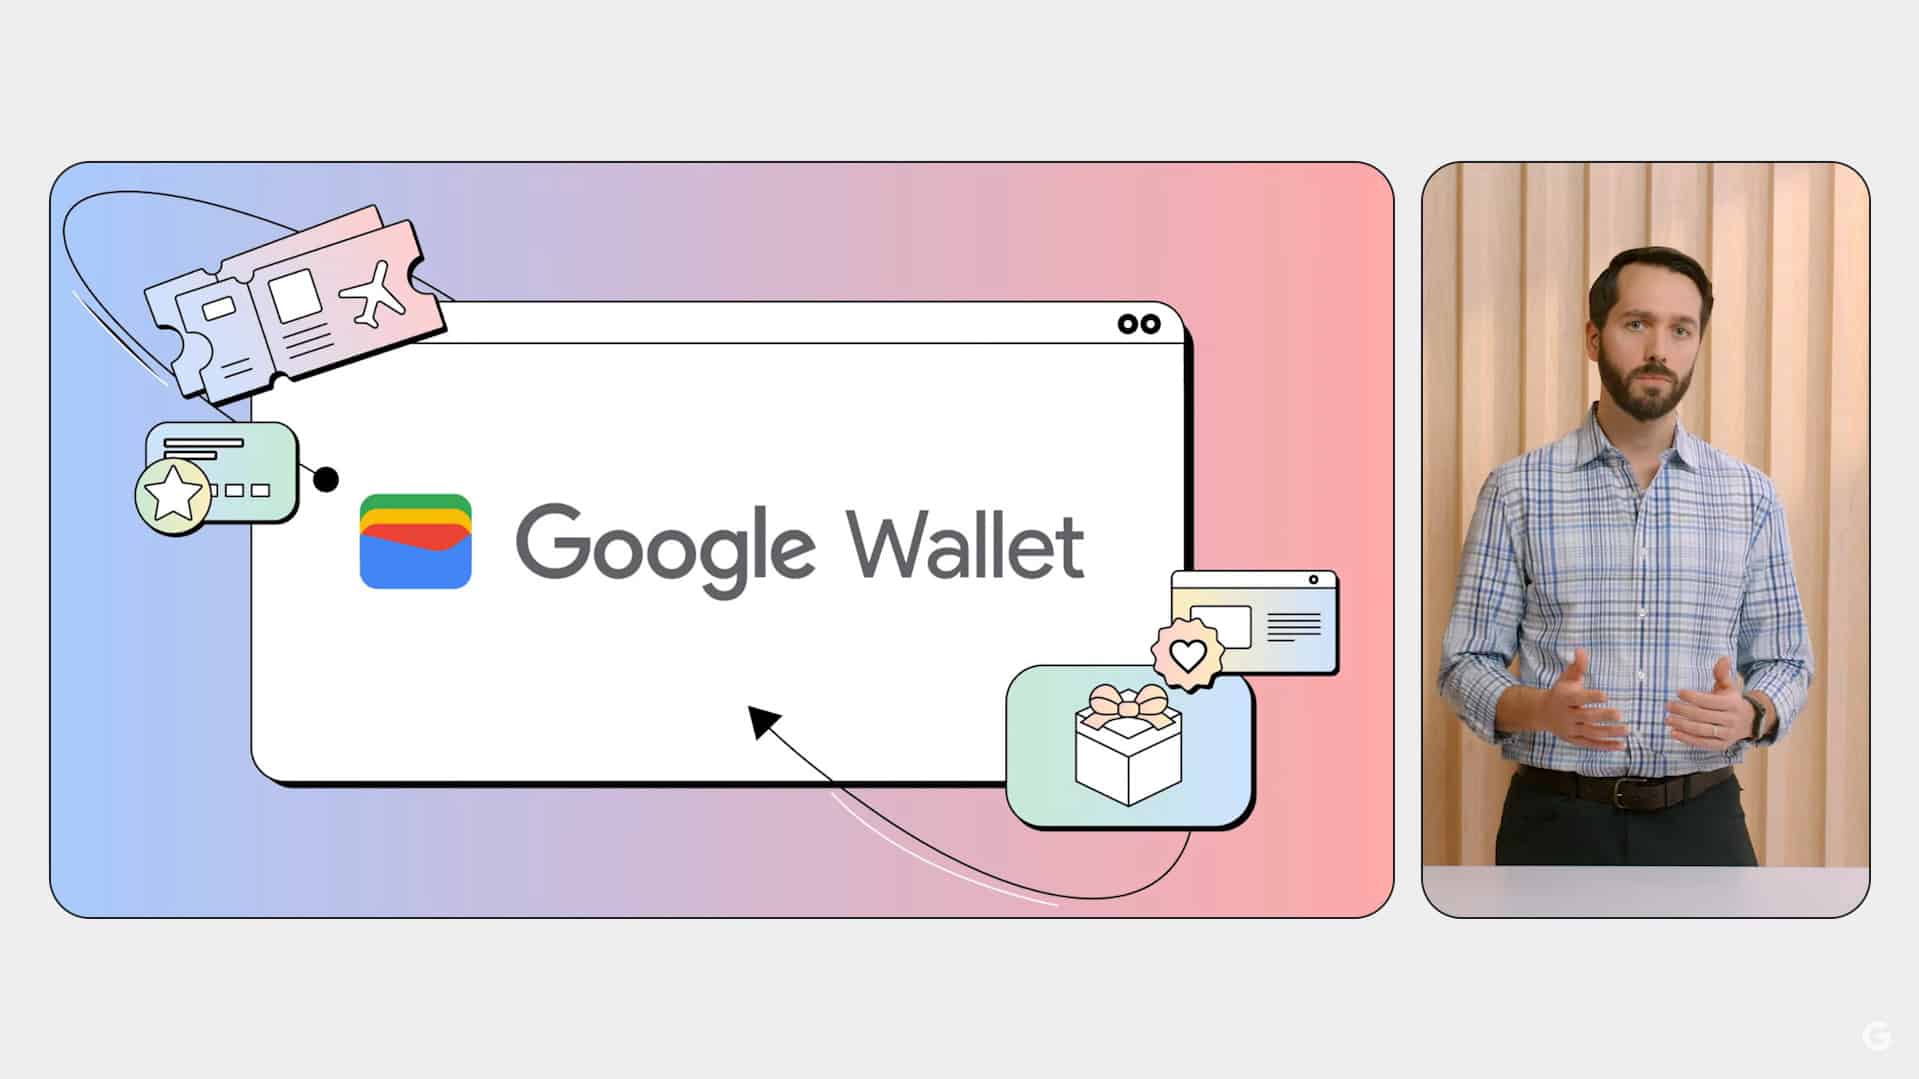 Google introduced new features in Wallet during Google I/O